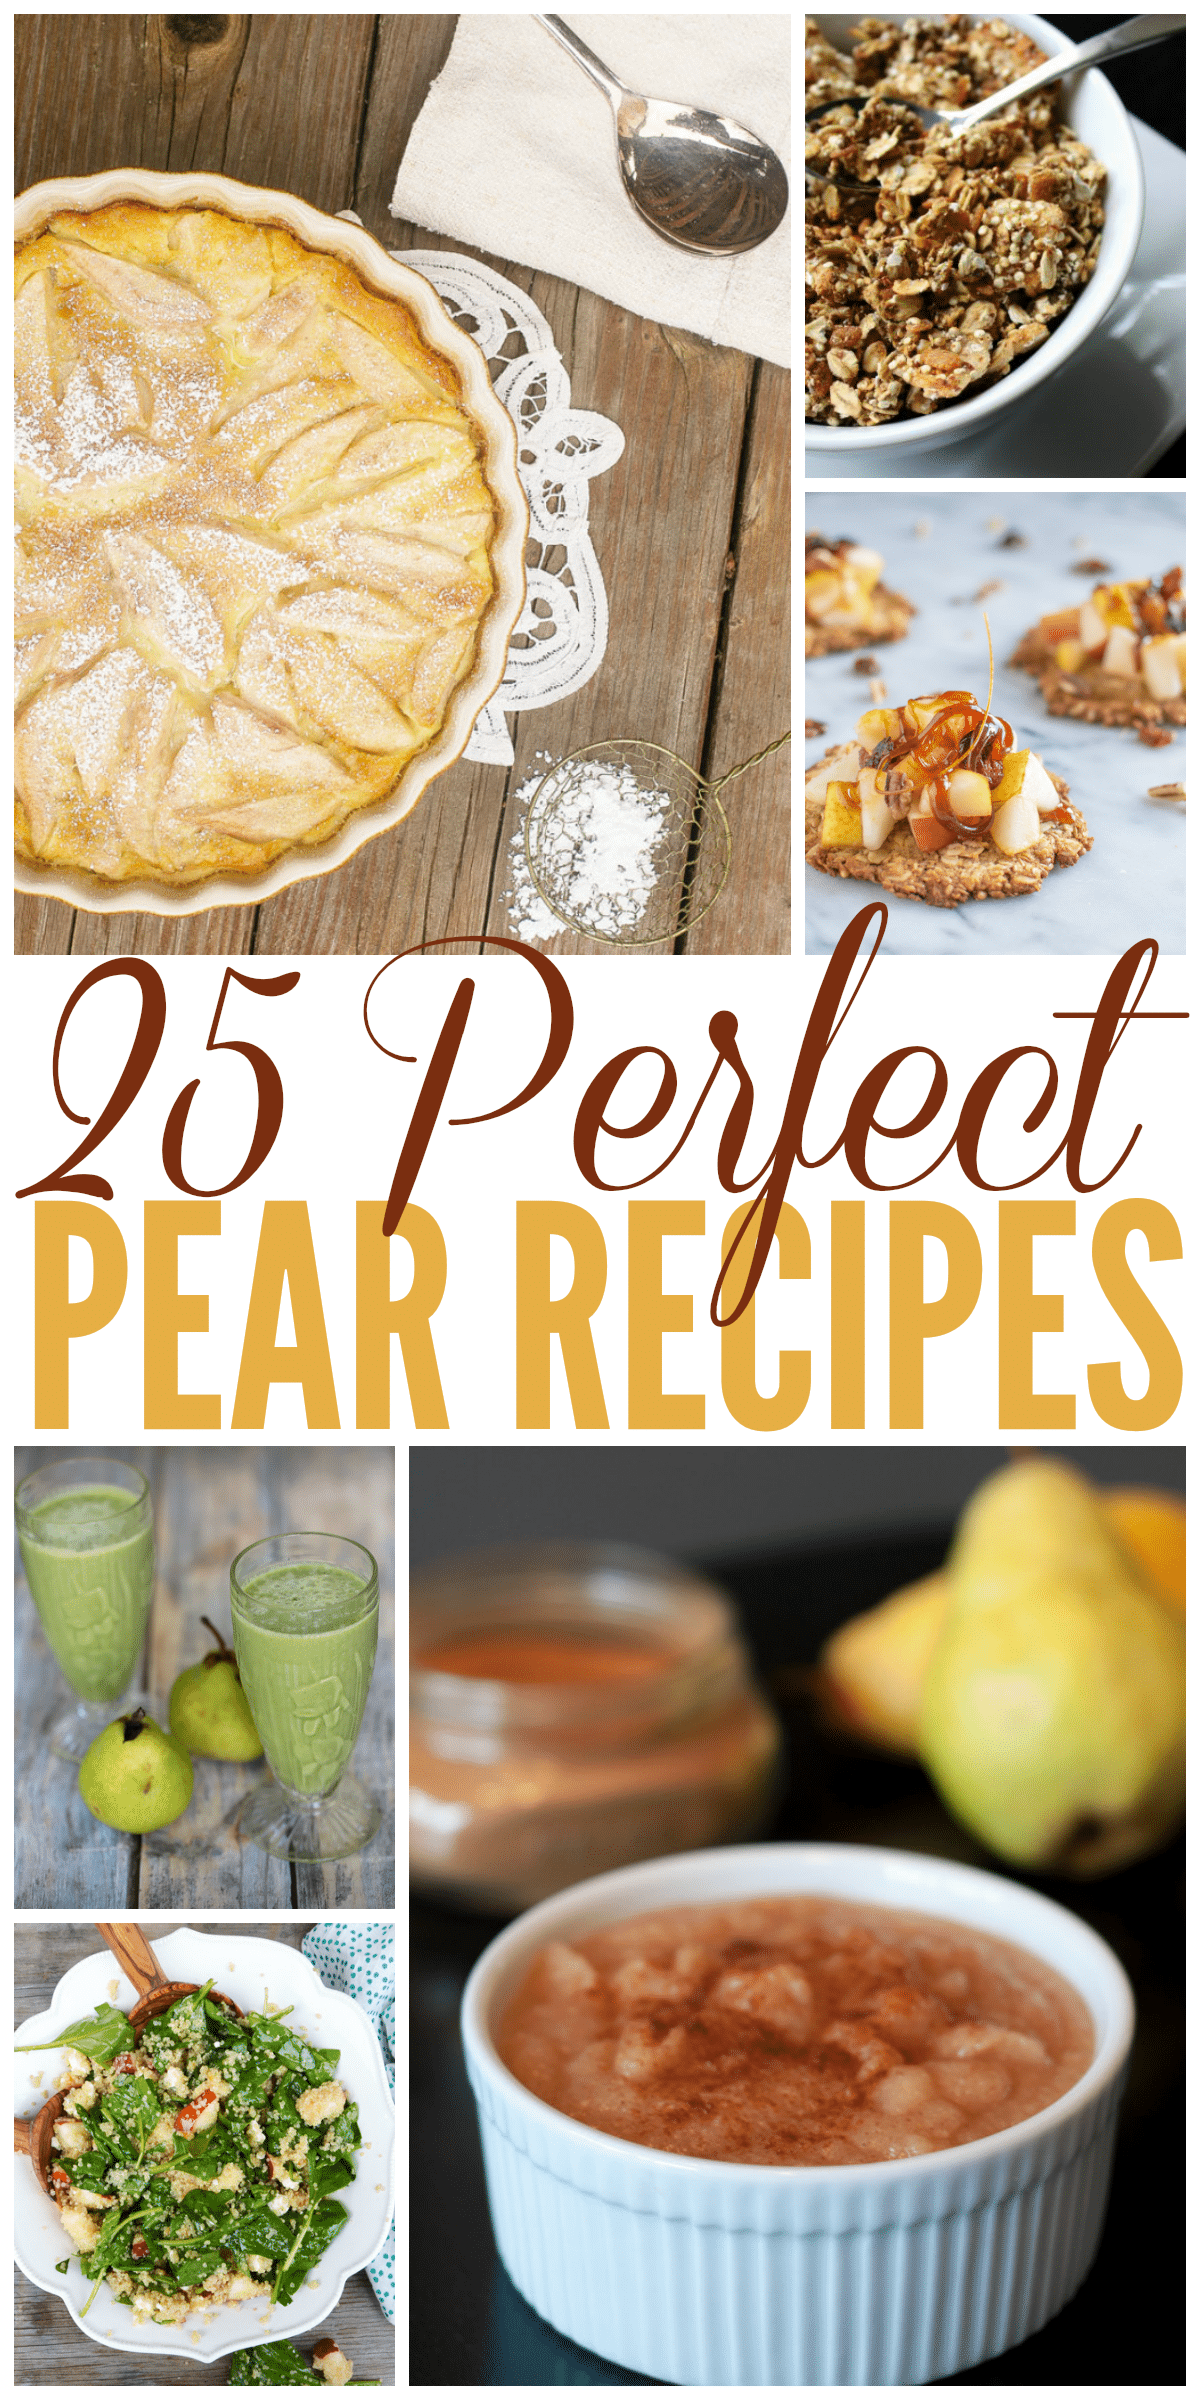 25 Perfect Pear Recipes for Fall